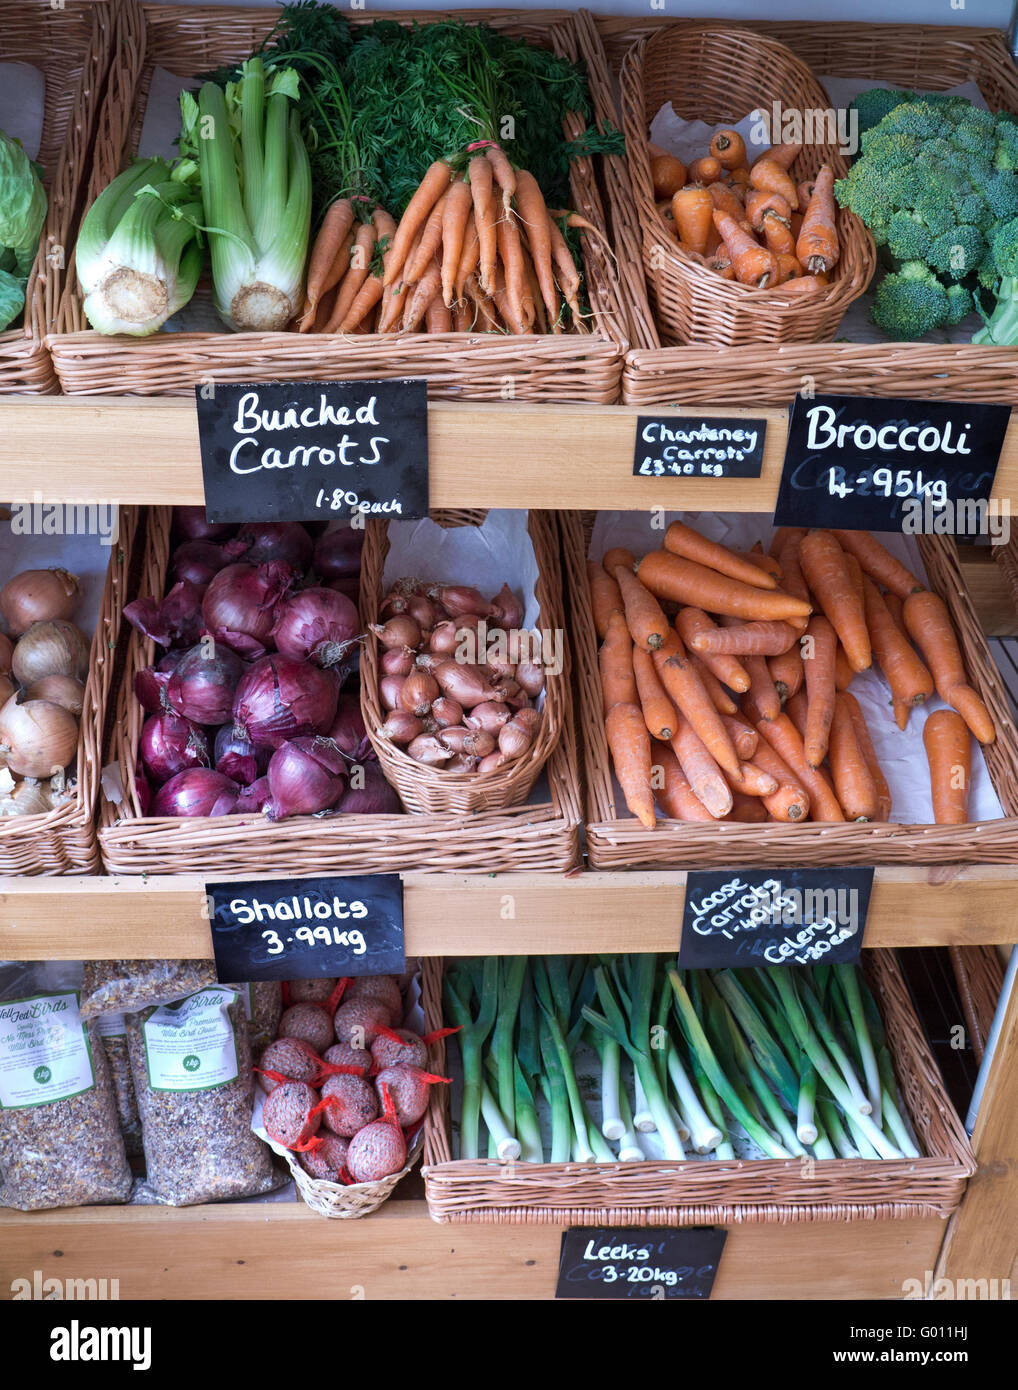 Vegetables local UK produce blackboard display in UK British greengrocers farm shop interior with fresh fruit vegetables Stow on the Wold Cotswolds UK Stock Photo